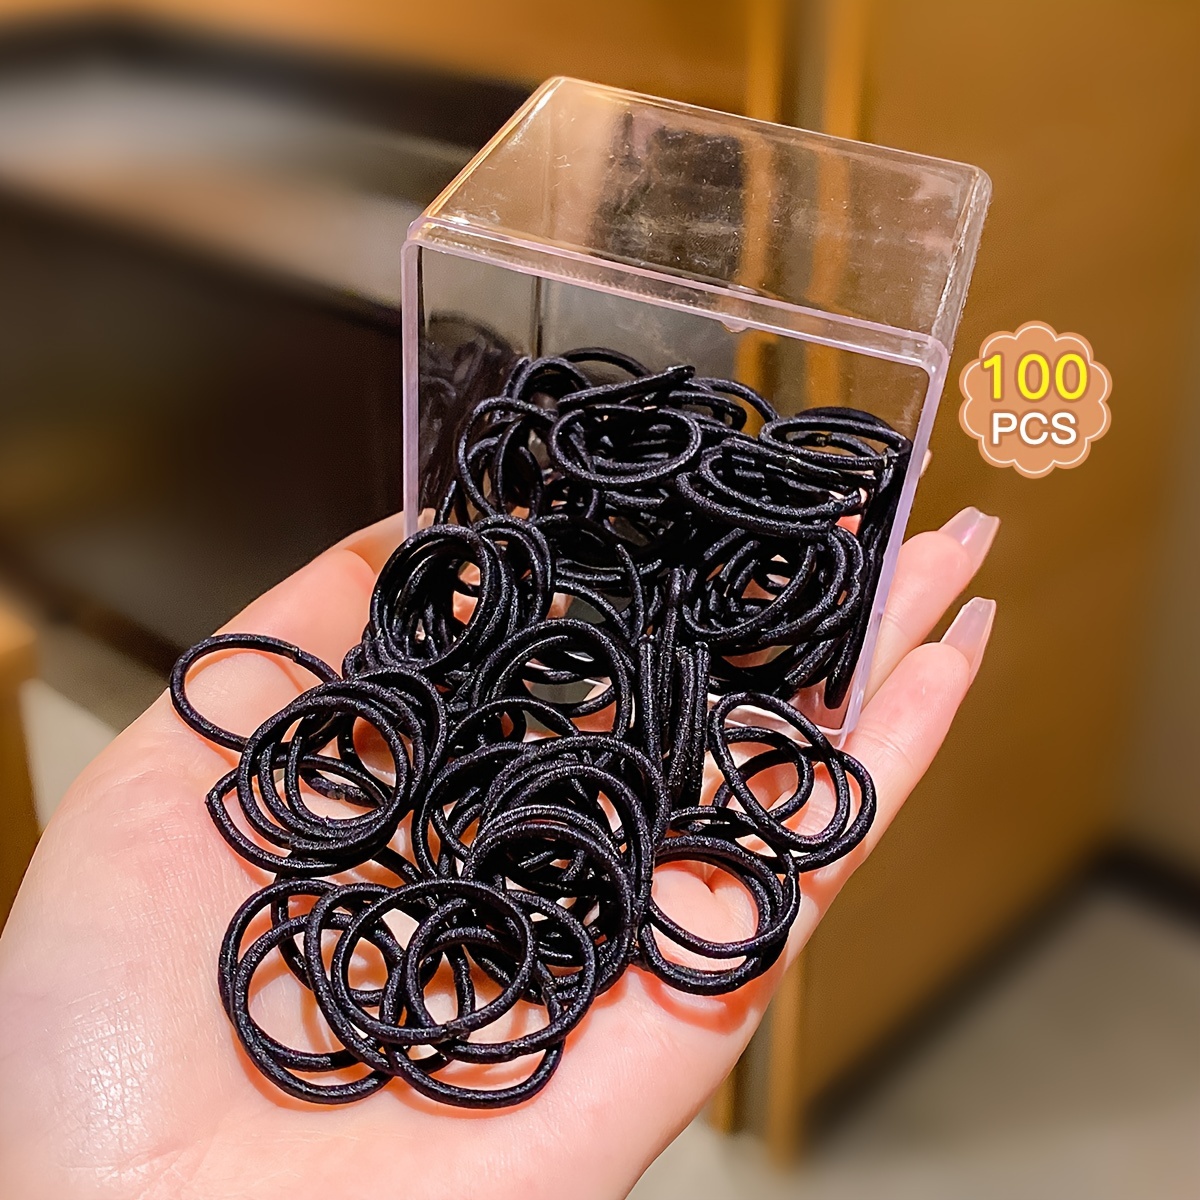 Girls Rubber Bands,150Pcs Mini Black Elastic Hair Bands Small Clear Colorful  Hair Ties No-Slip Ponytail Holders for Girls Toddler Kids Infant,Spring 